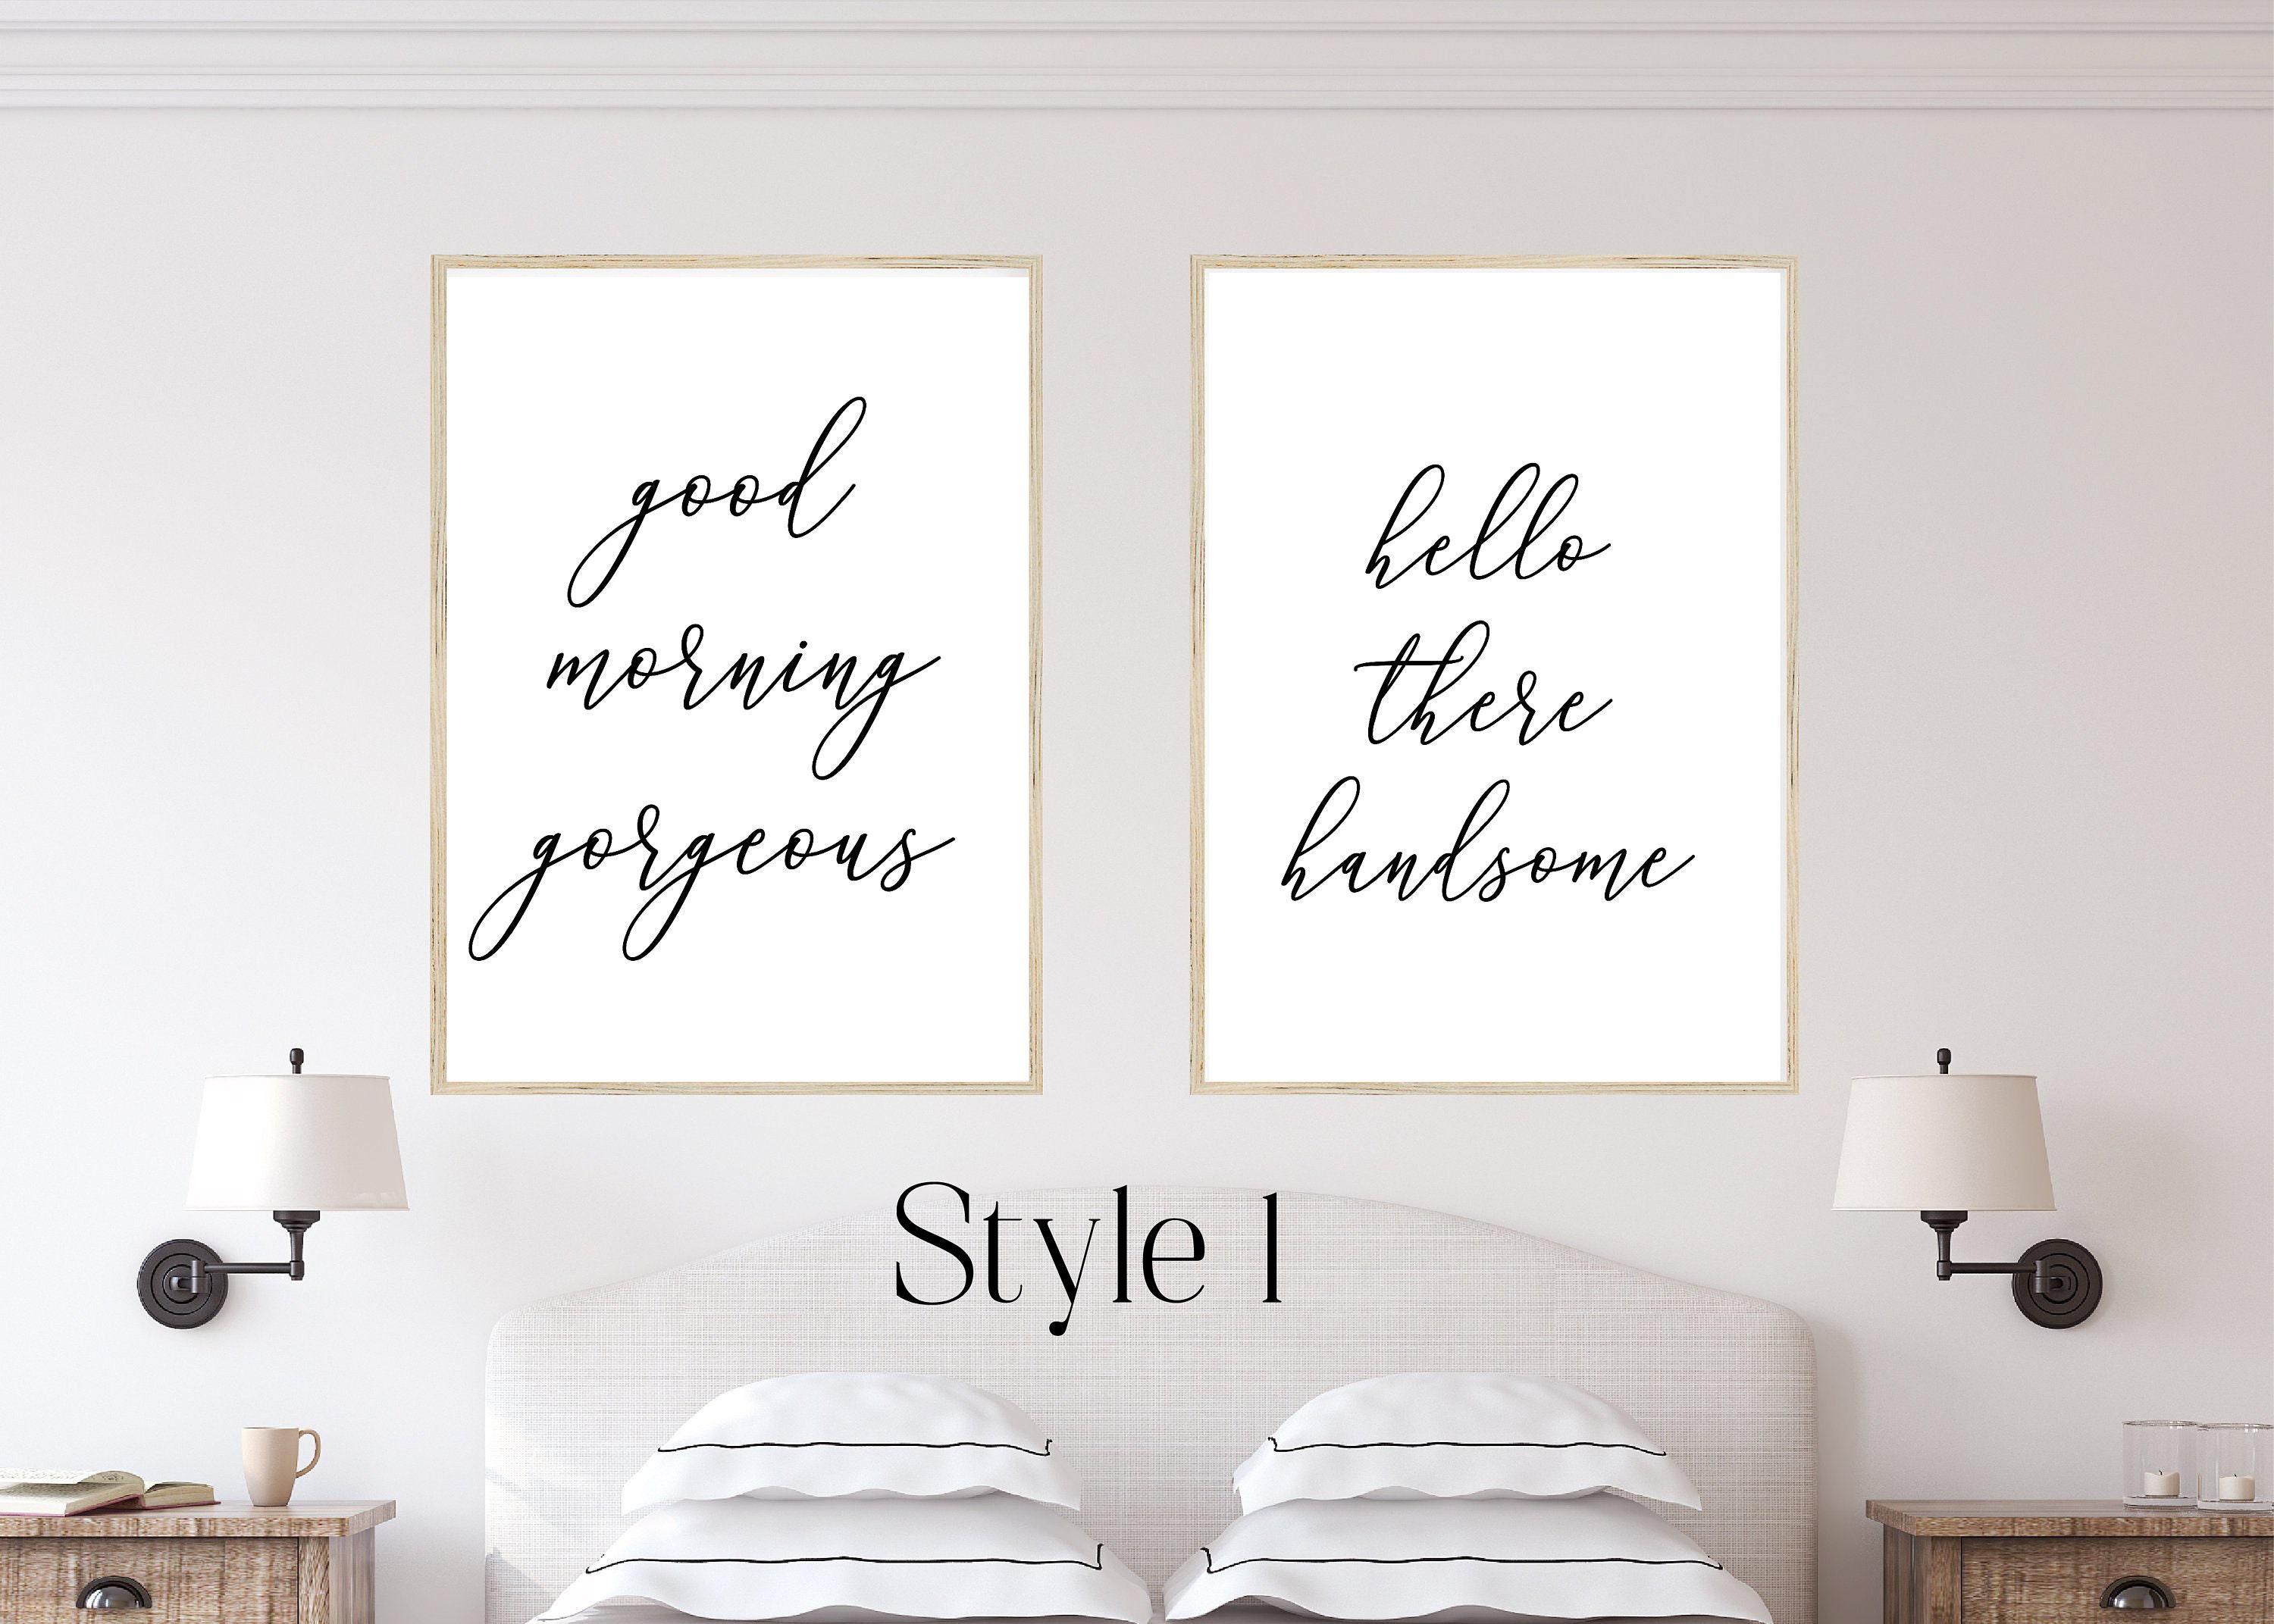 Hello Handsome Good Morning Gorgeous Marriage Family Bedroom - Etsy ...